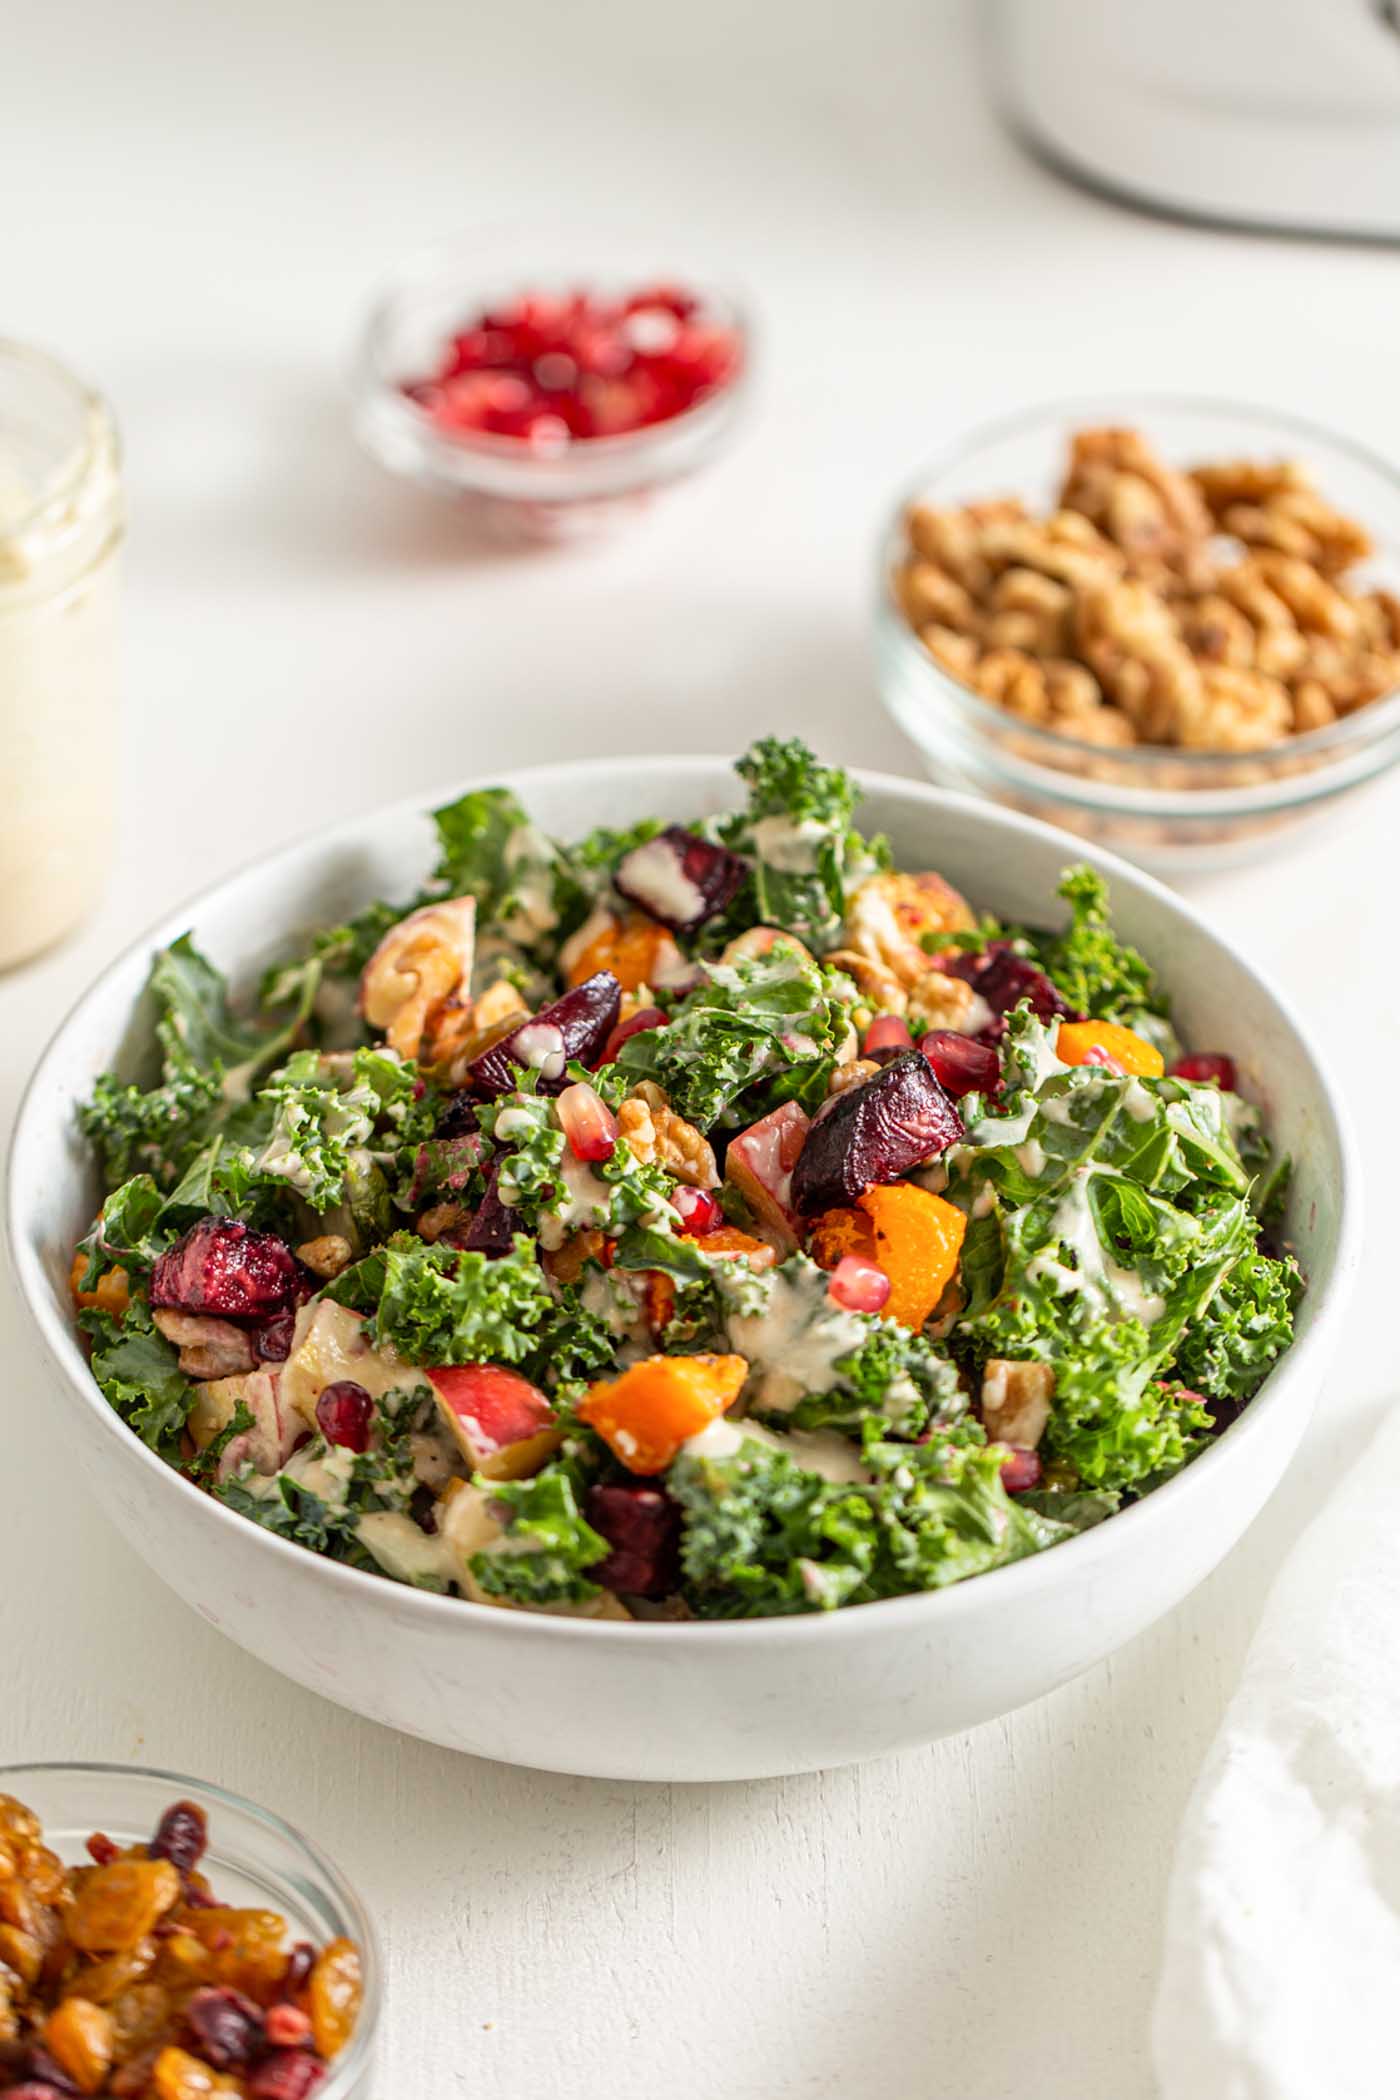 Bowl of kale salad with squash, beets, brussels sprouts, walnuts and pomegranate.